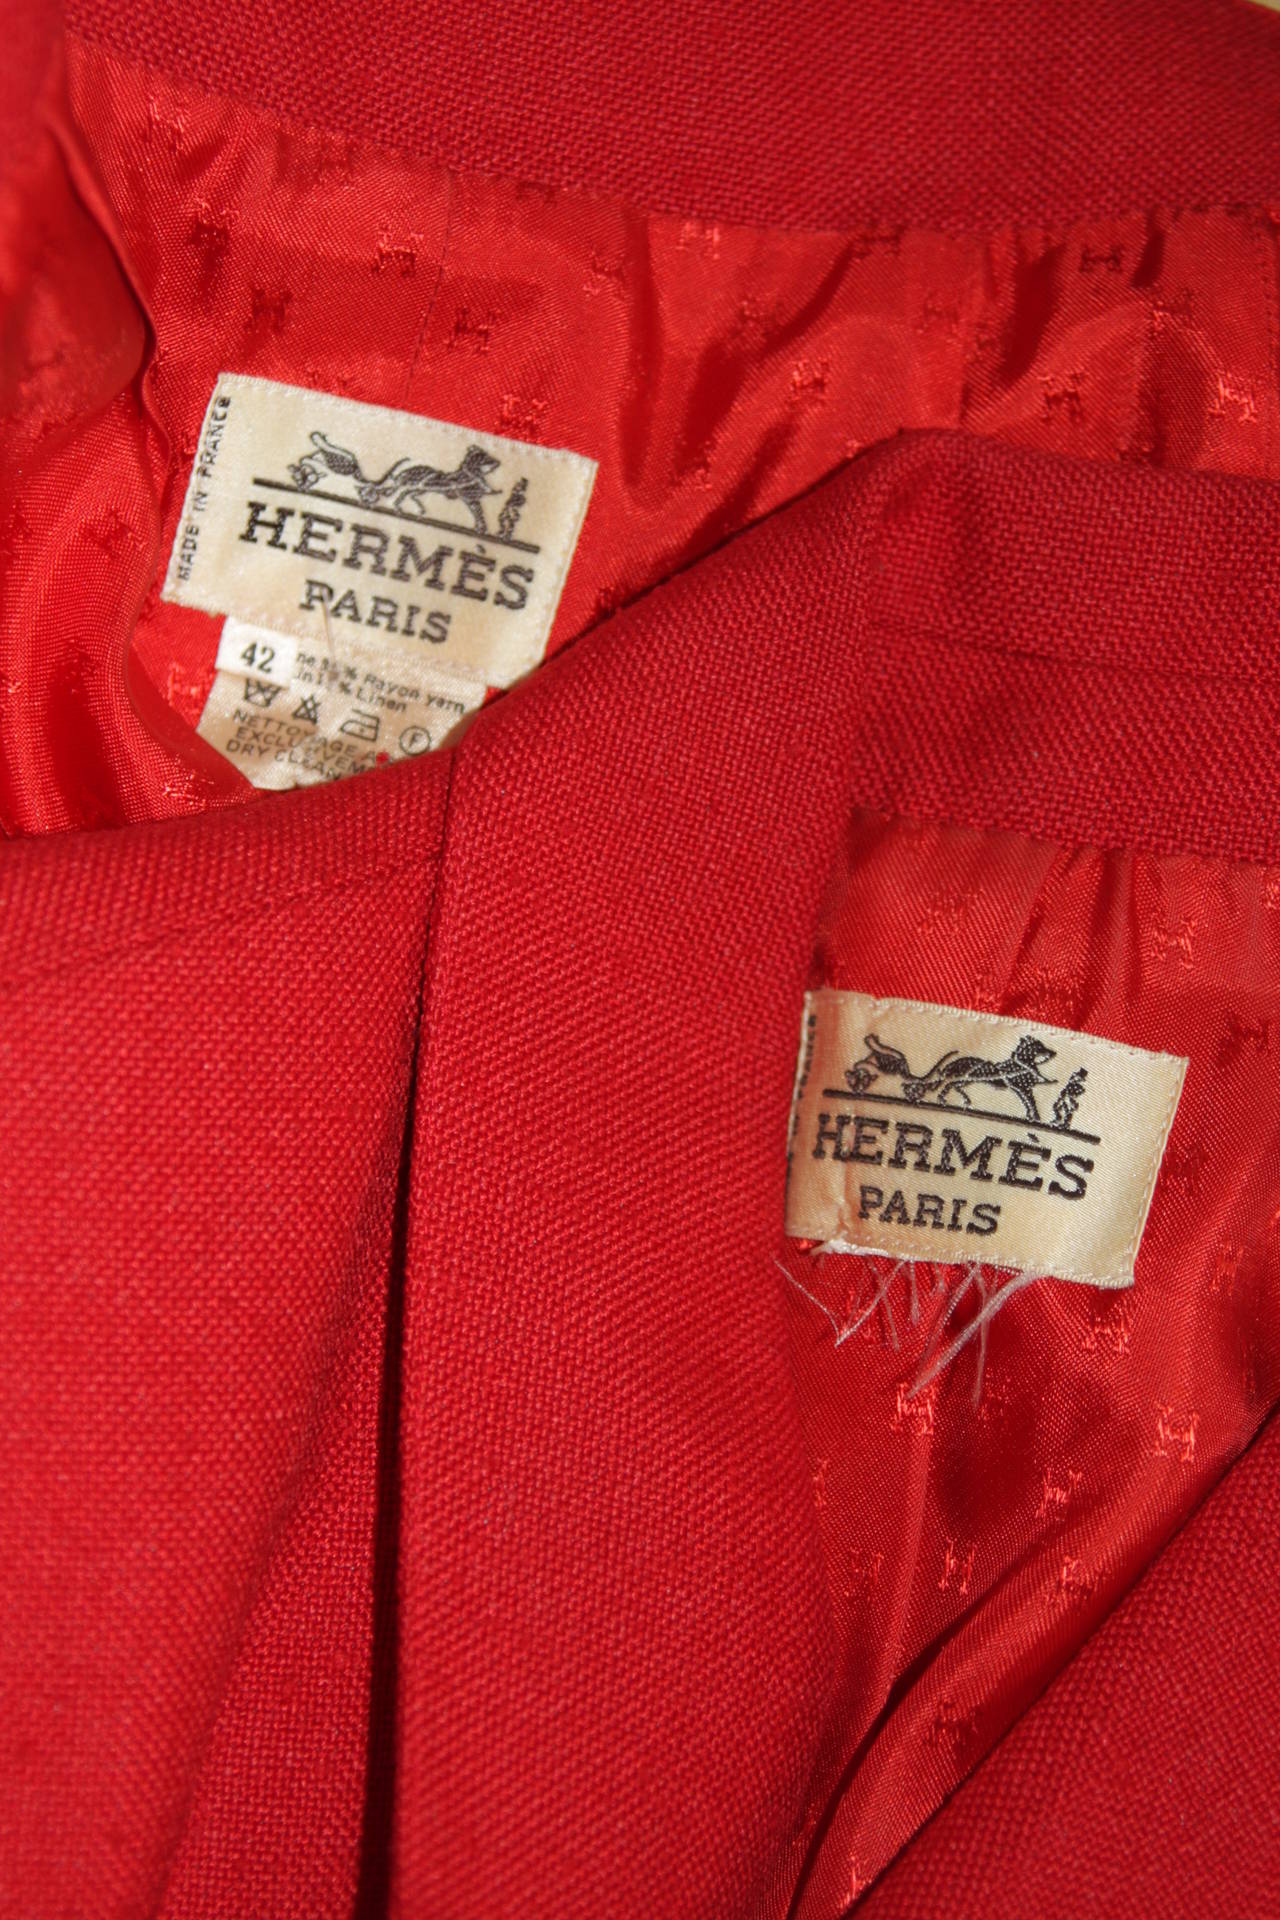 Hermes Two Piece Red Linen Skirt Suit with Short Sleeve Jacket with H buttons 42 3